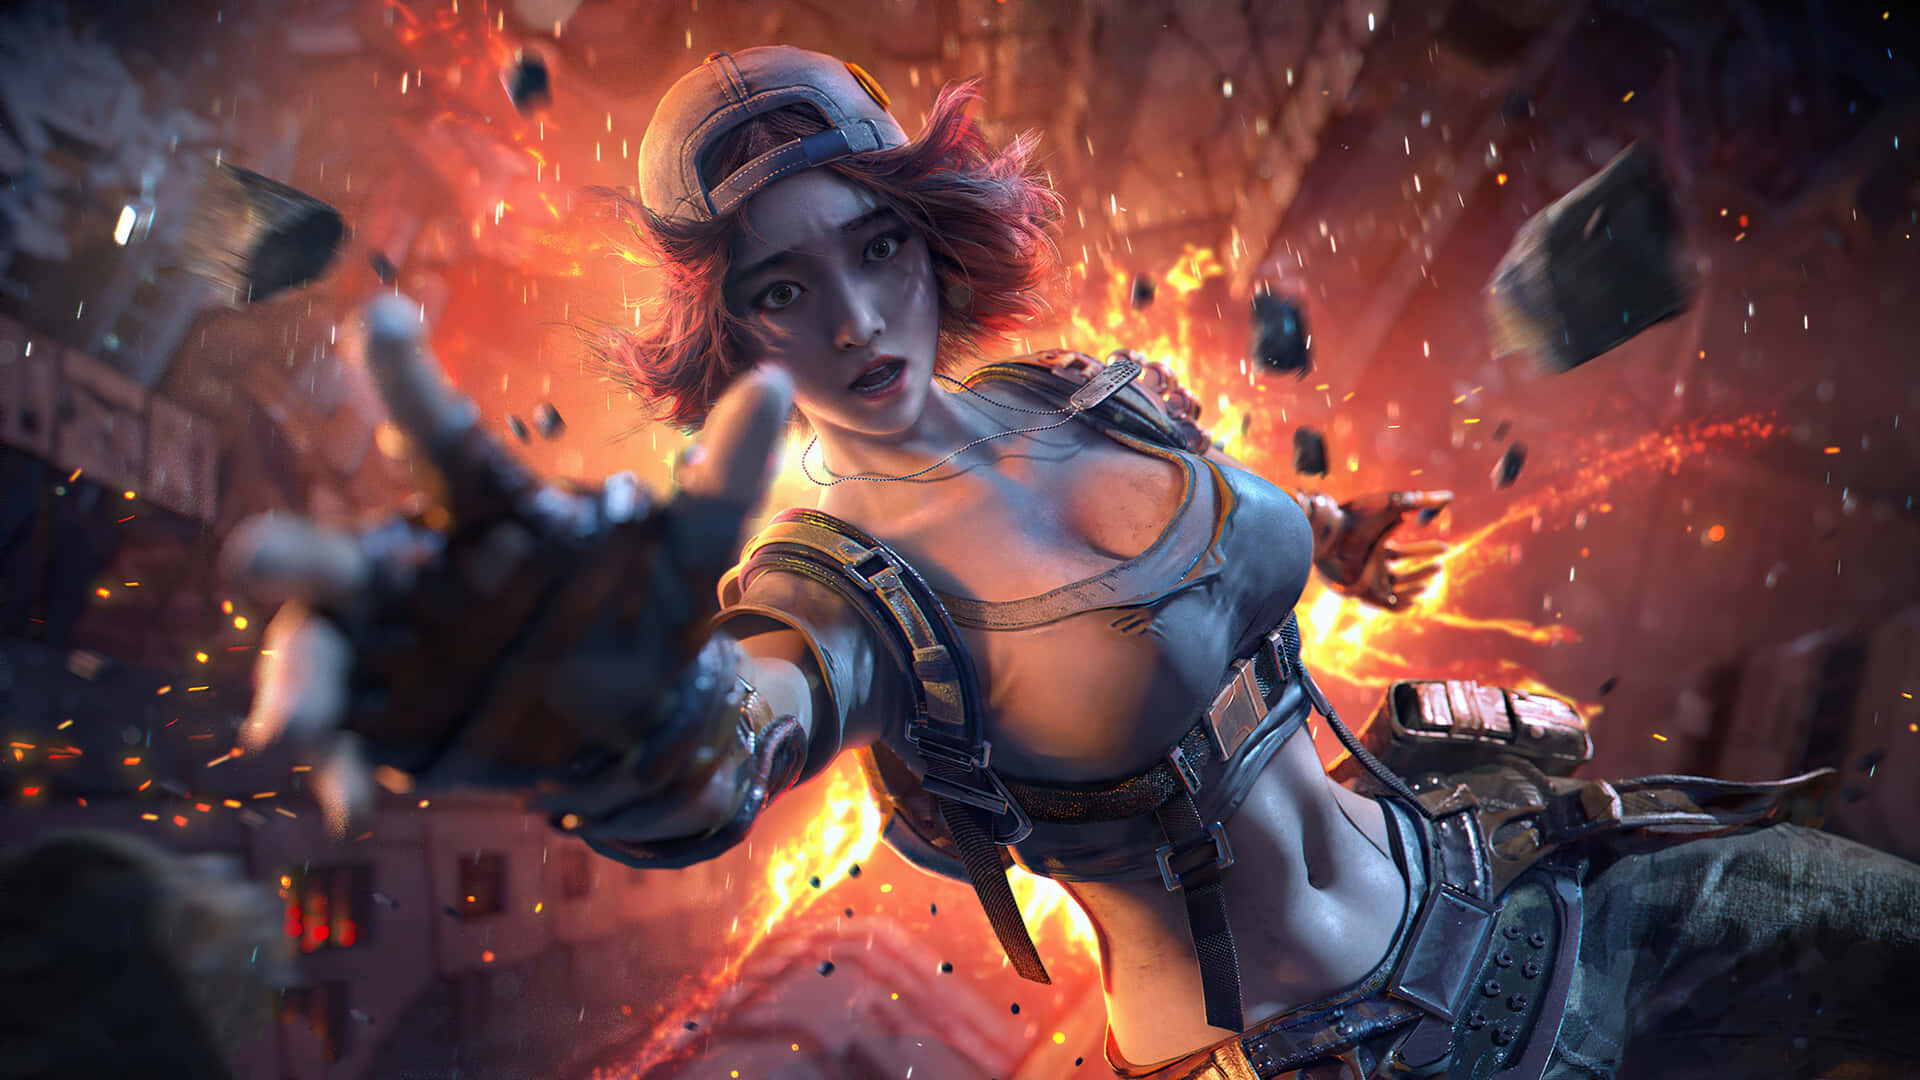 Sexy Pubg Girl Character On Fire Background